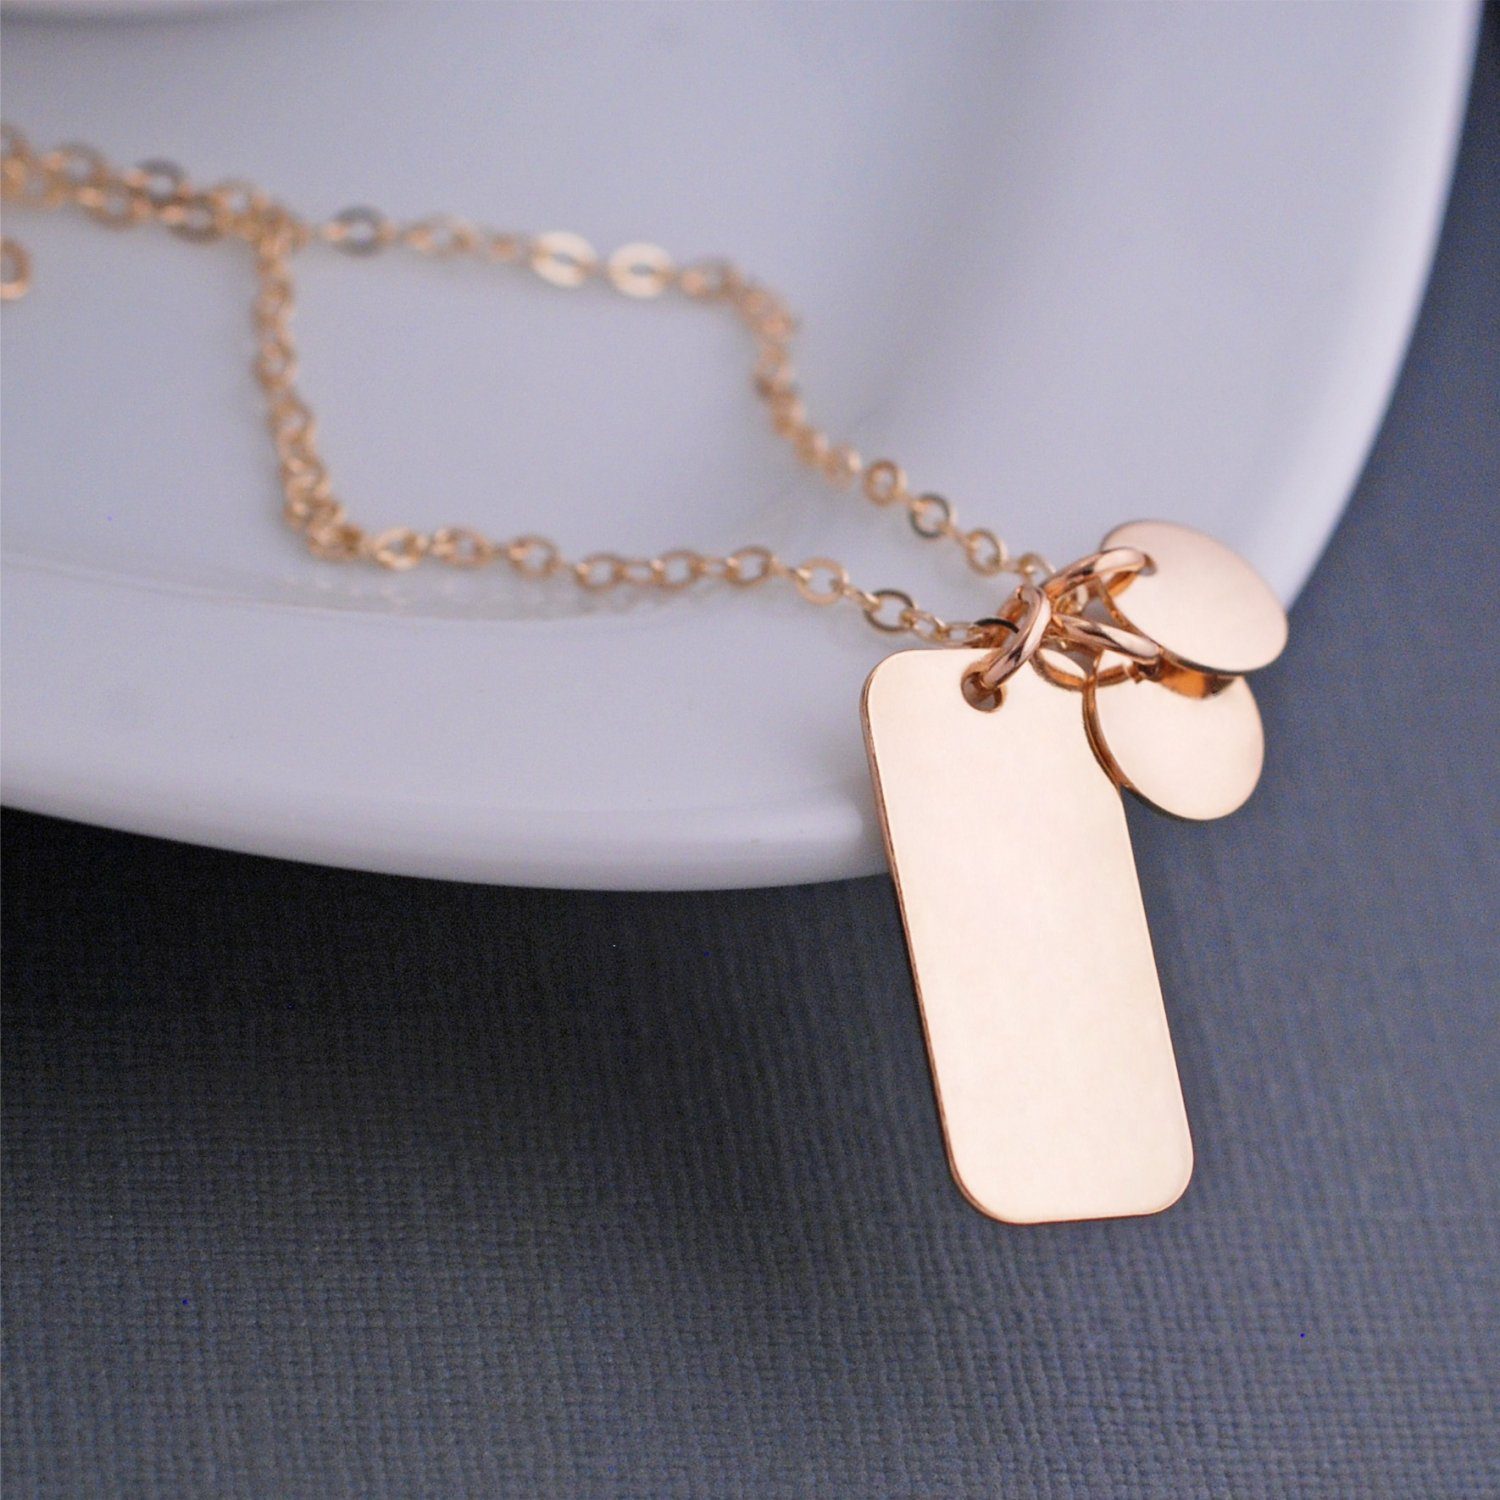 Design Your Own Necklace - 1 inch Rectangle – Necklace – georgie designs personalized jewelry